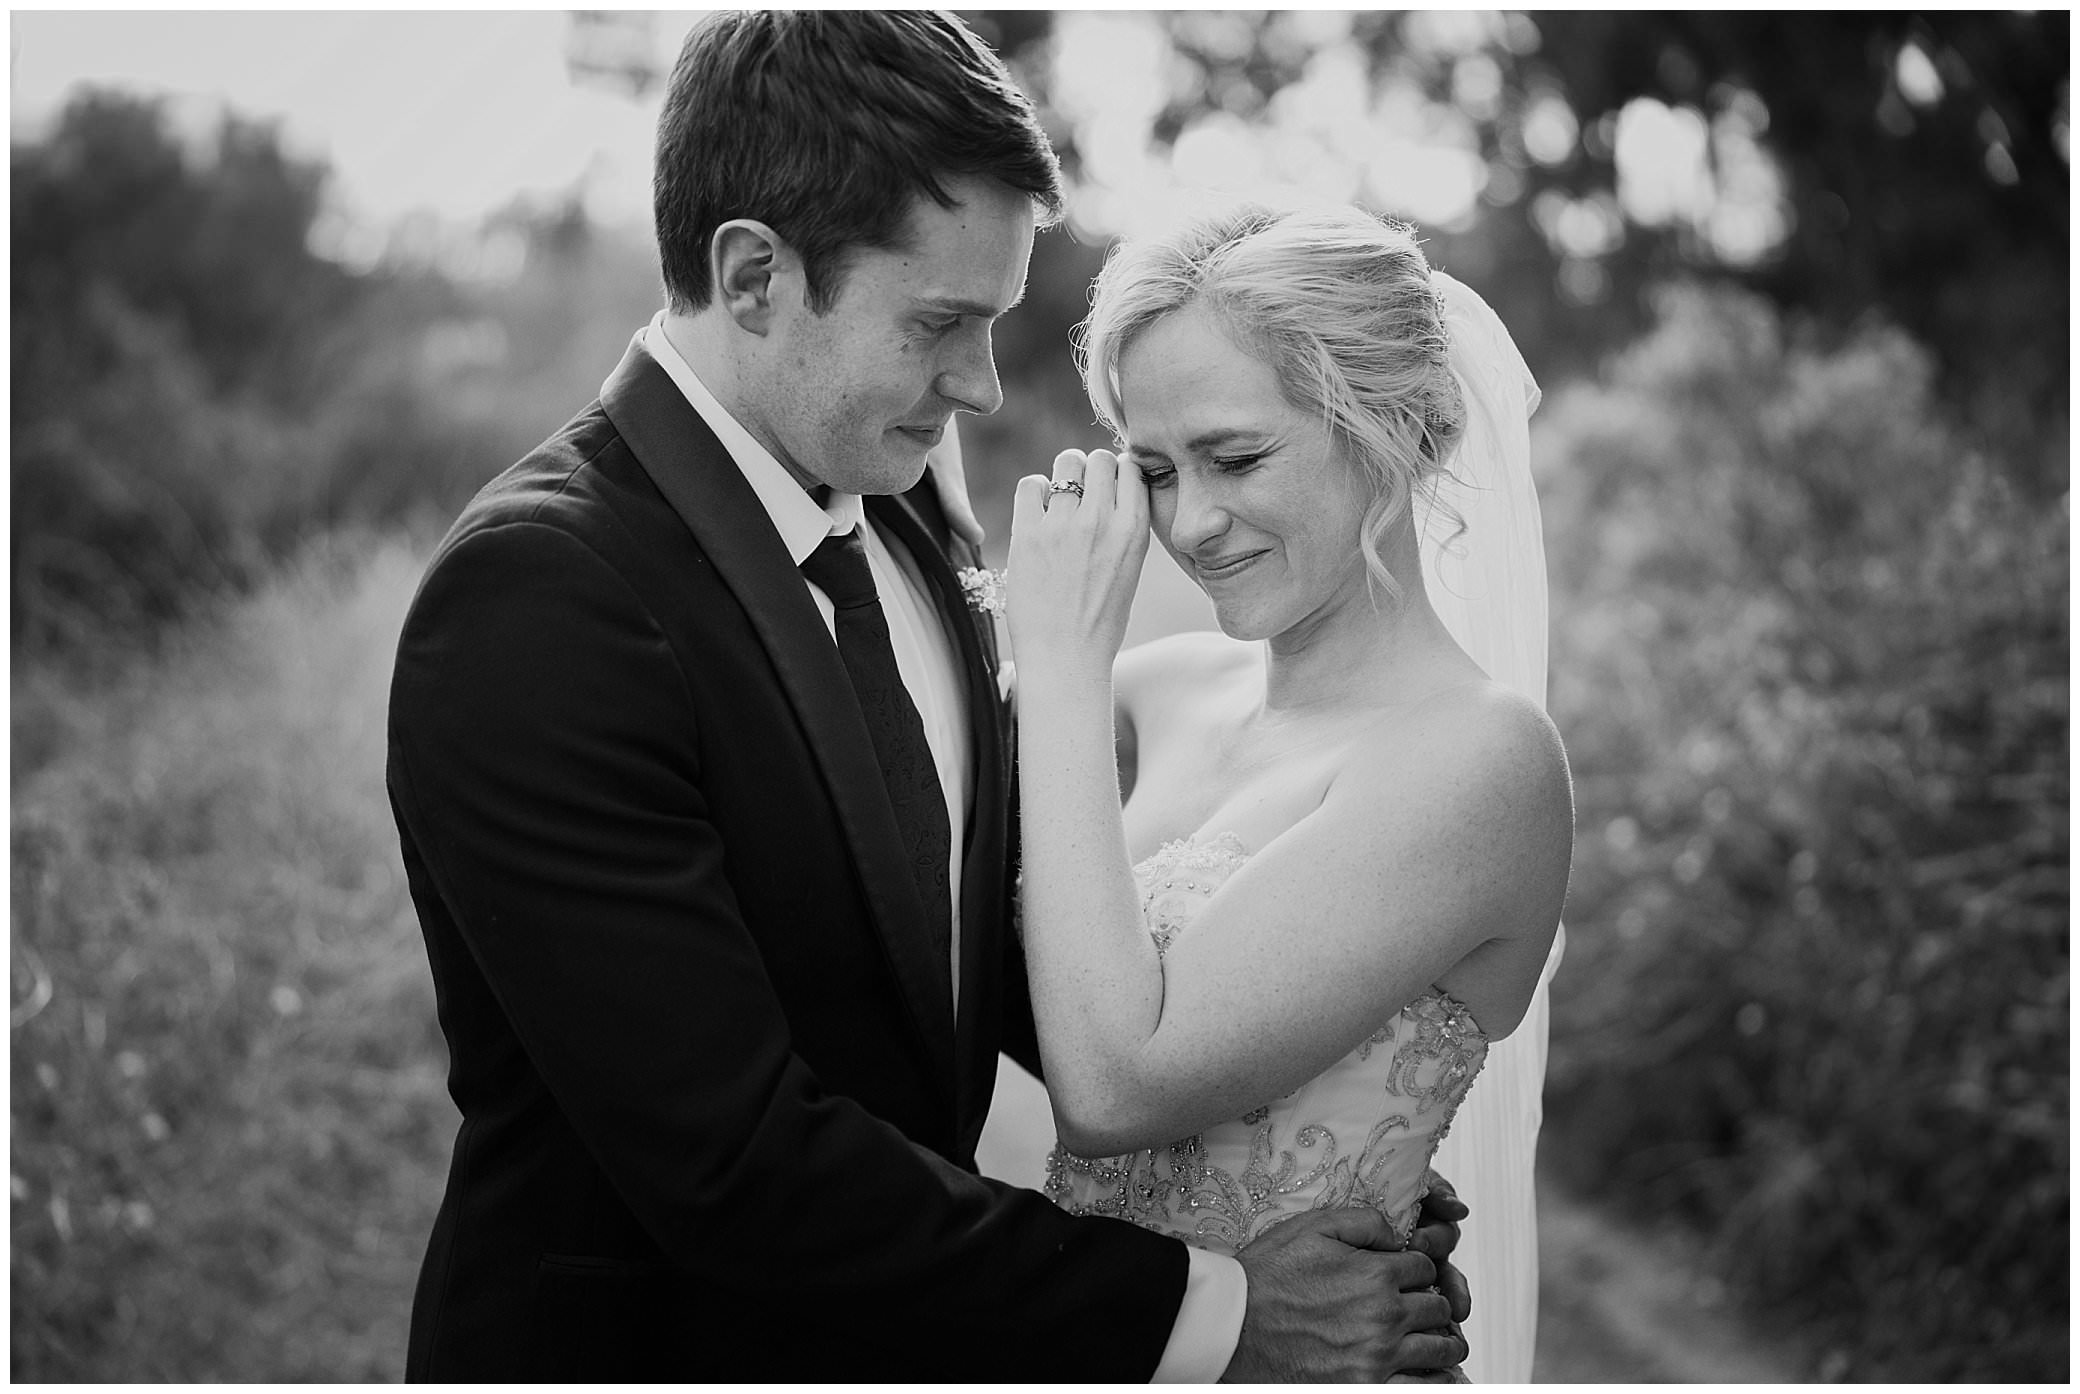 black and white photo of a bride and groom hug as a bride cries down a country road for real emotion on a wedding day as captured by Karissa Tamworth NSW wedding photographer